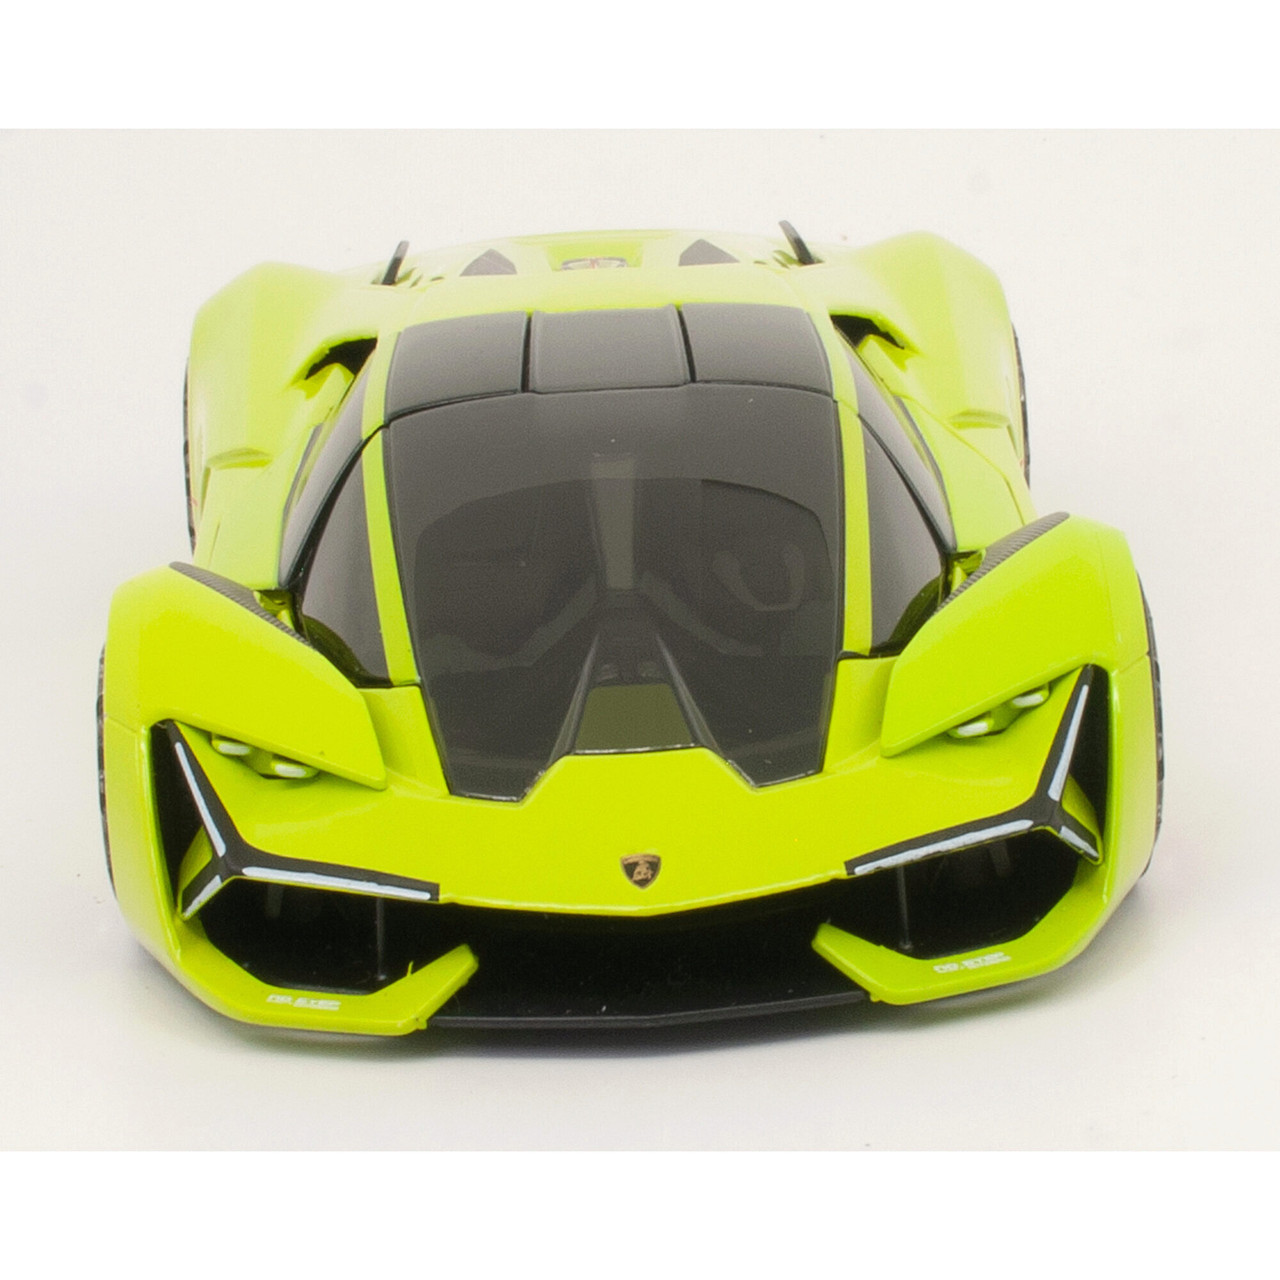 Lamborghini Terzo Millennio - Bburago 1:24 Diecast / Wooden Base and an  Engraved Plaque available with the car purchase at a discount /SC76